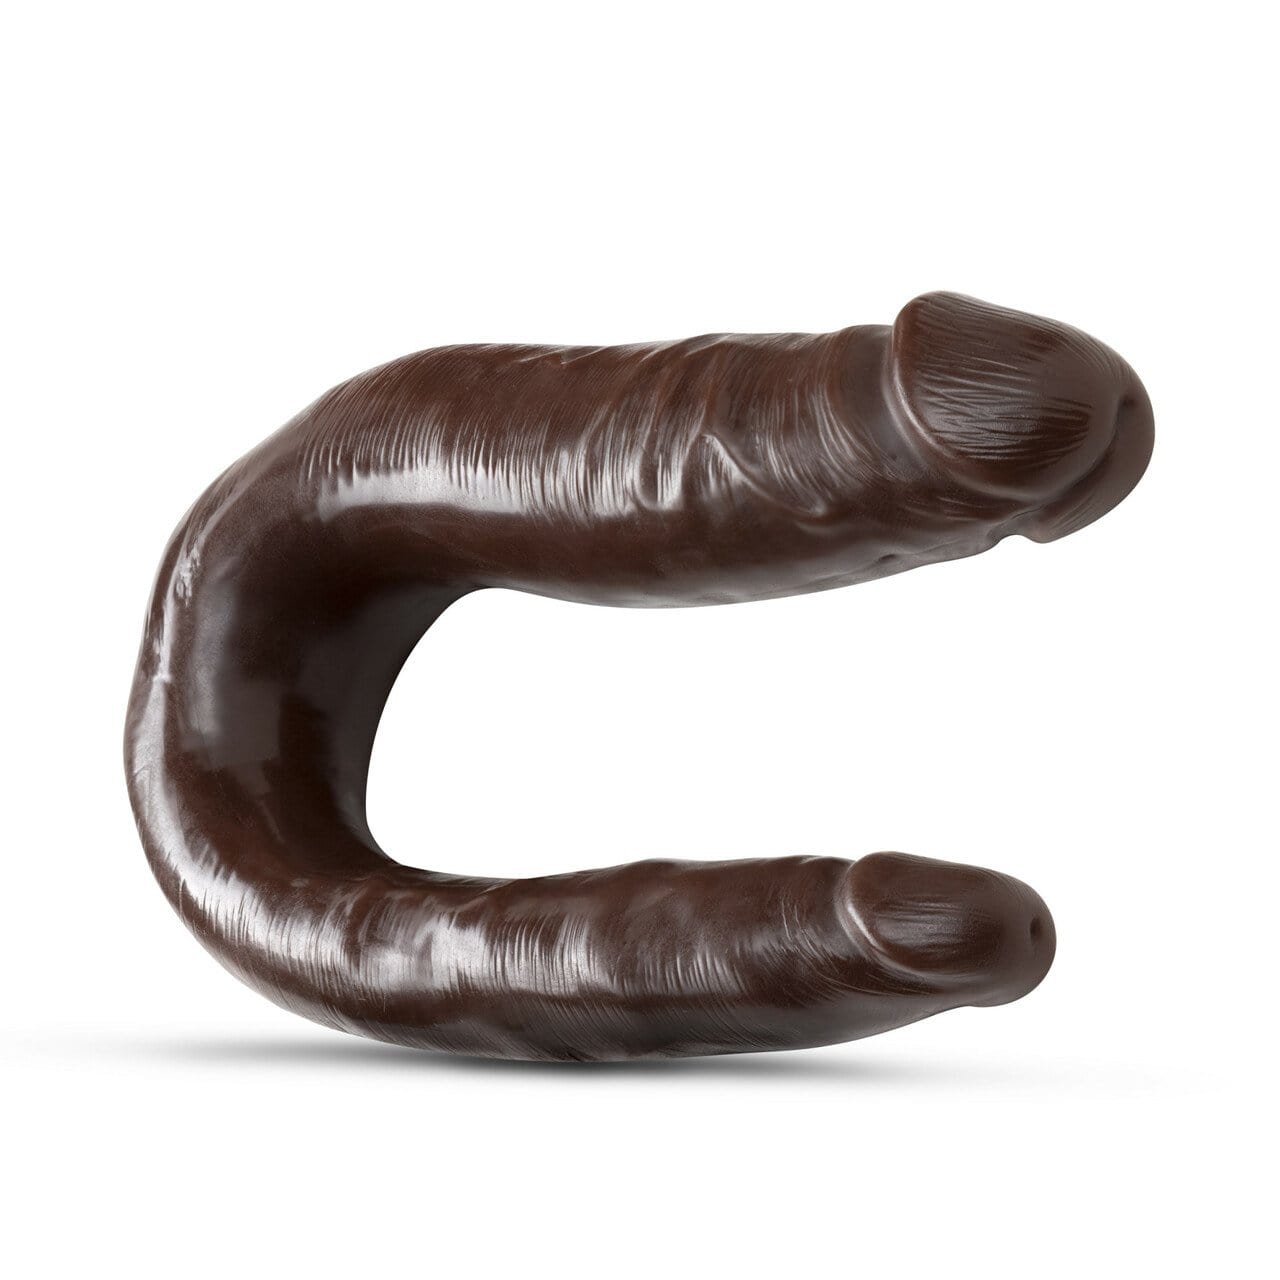 Dr. Skin Mini Double Dong - Chocolate - Thorn & Feather Sex Toy Canada